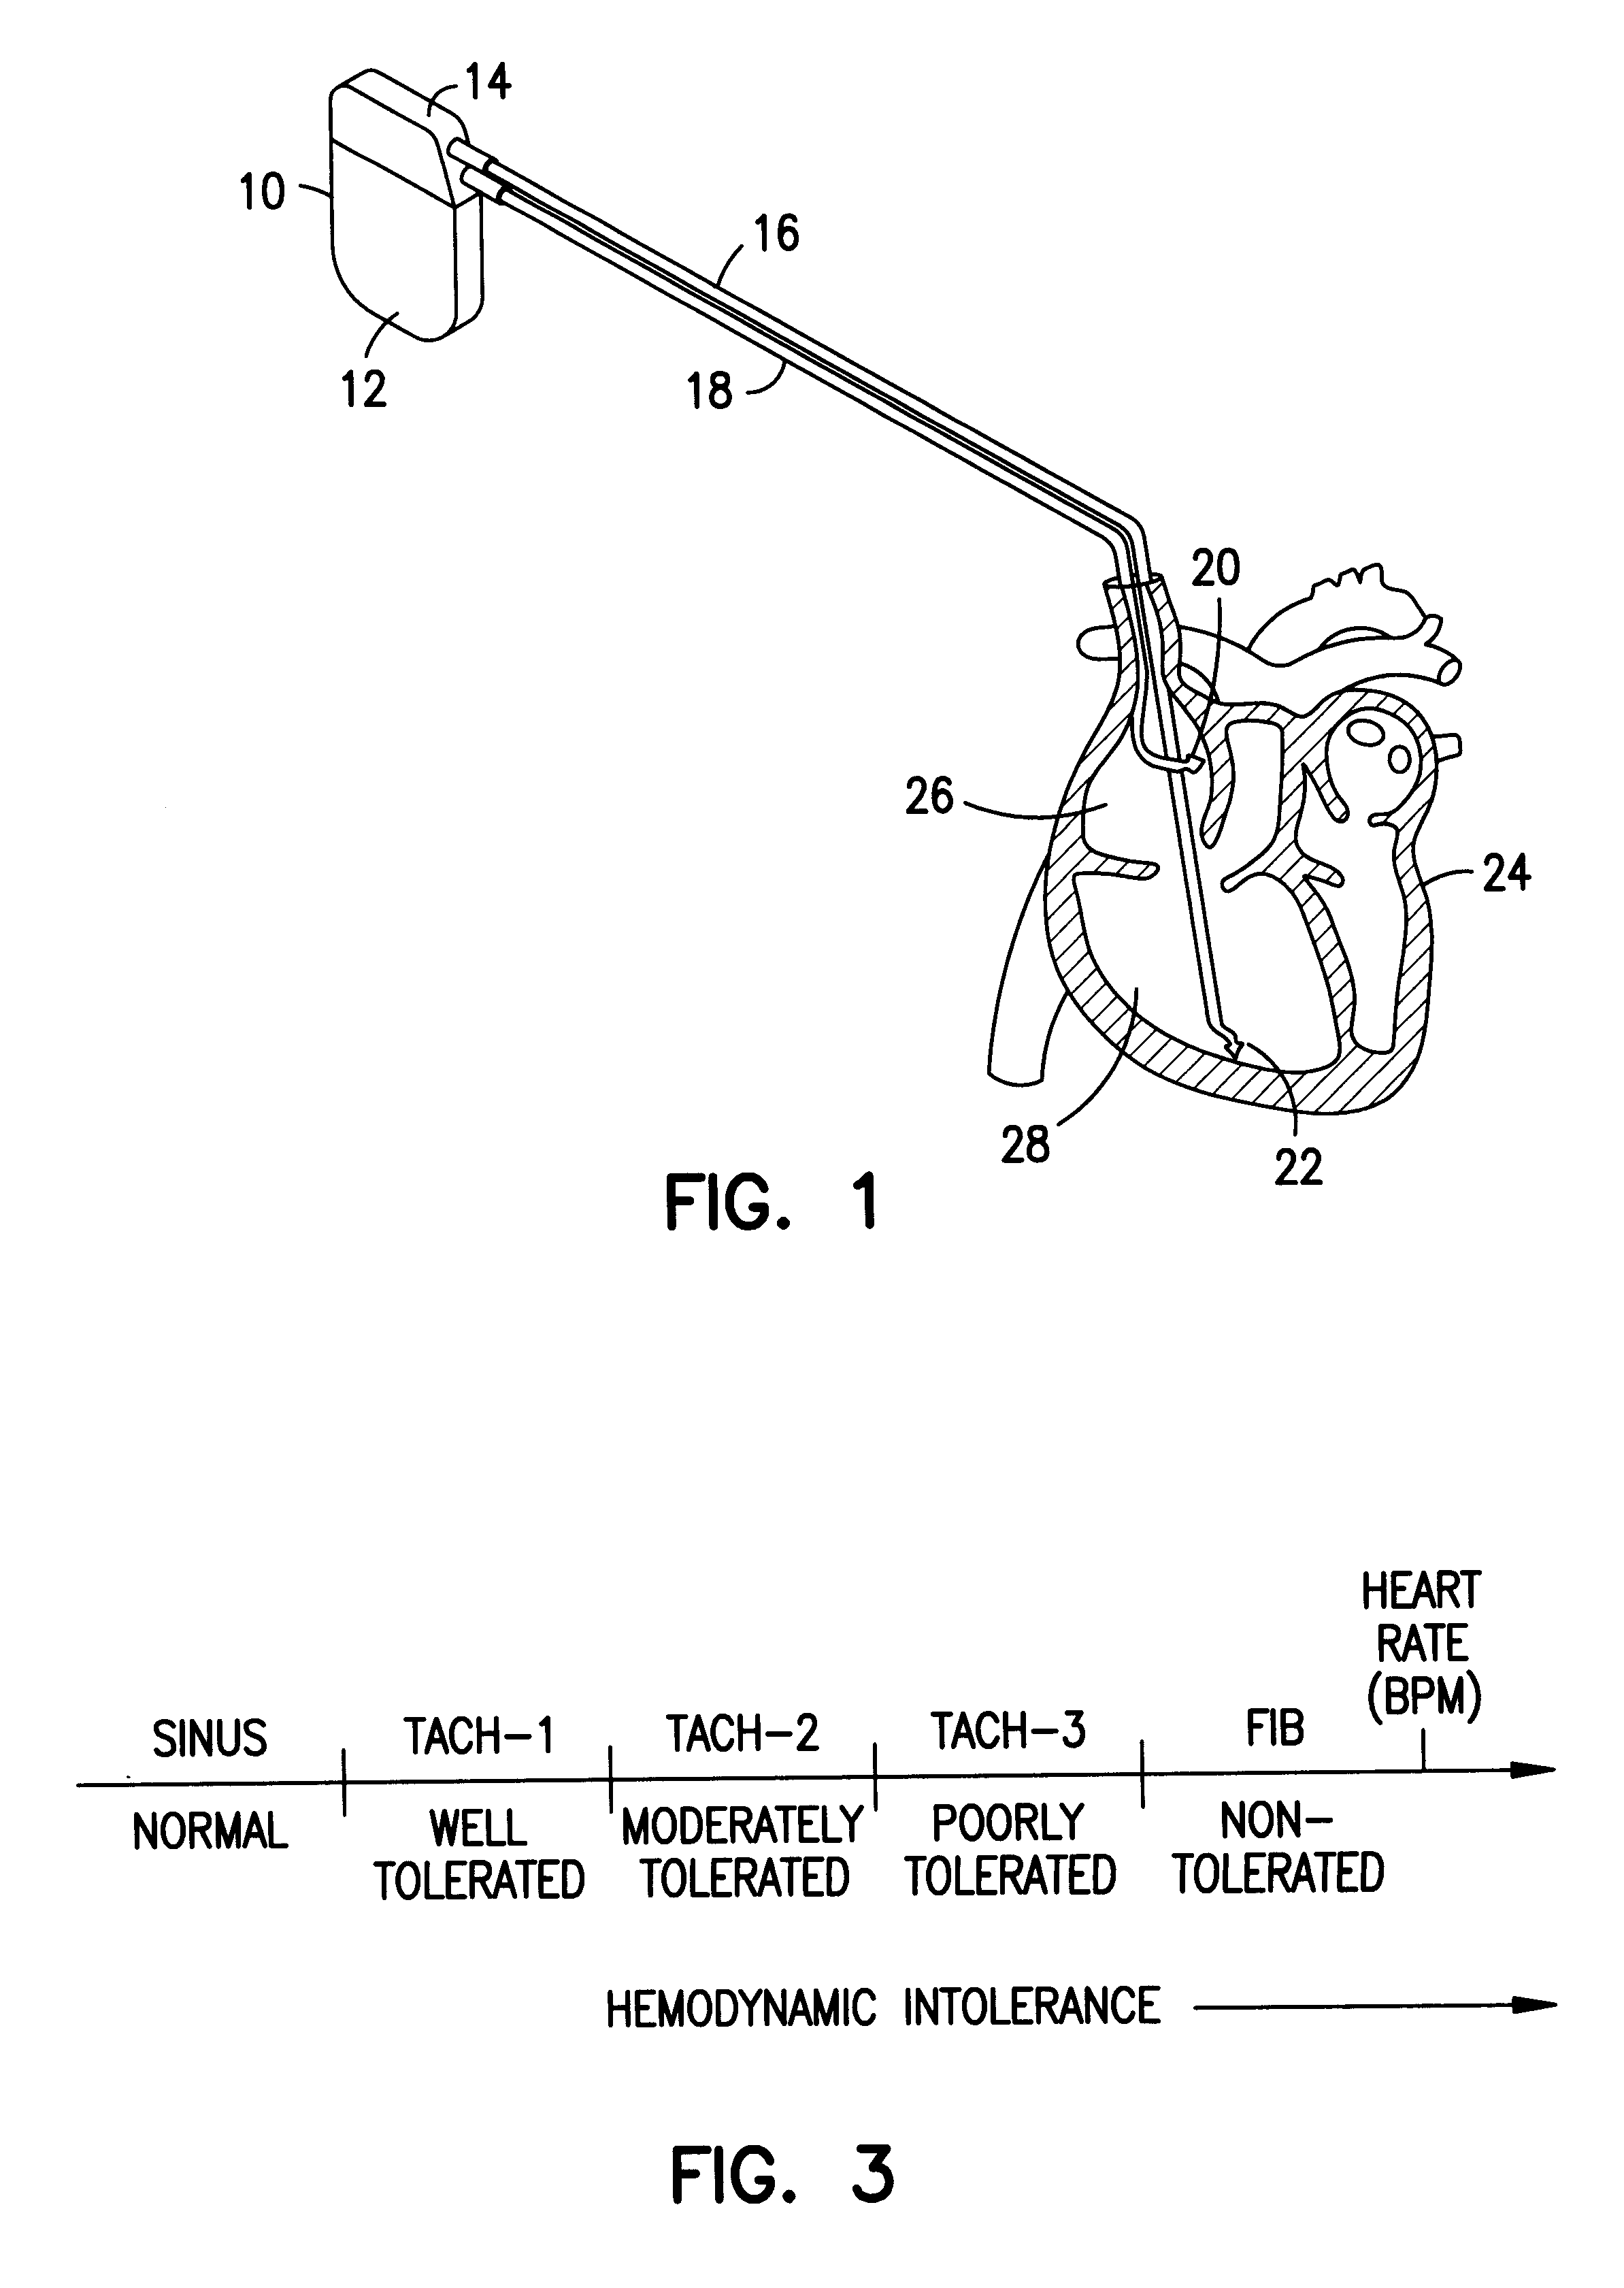 Methods and apparatus for treating fibrillation and creating defibrillation waveforms